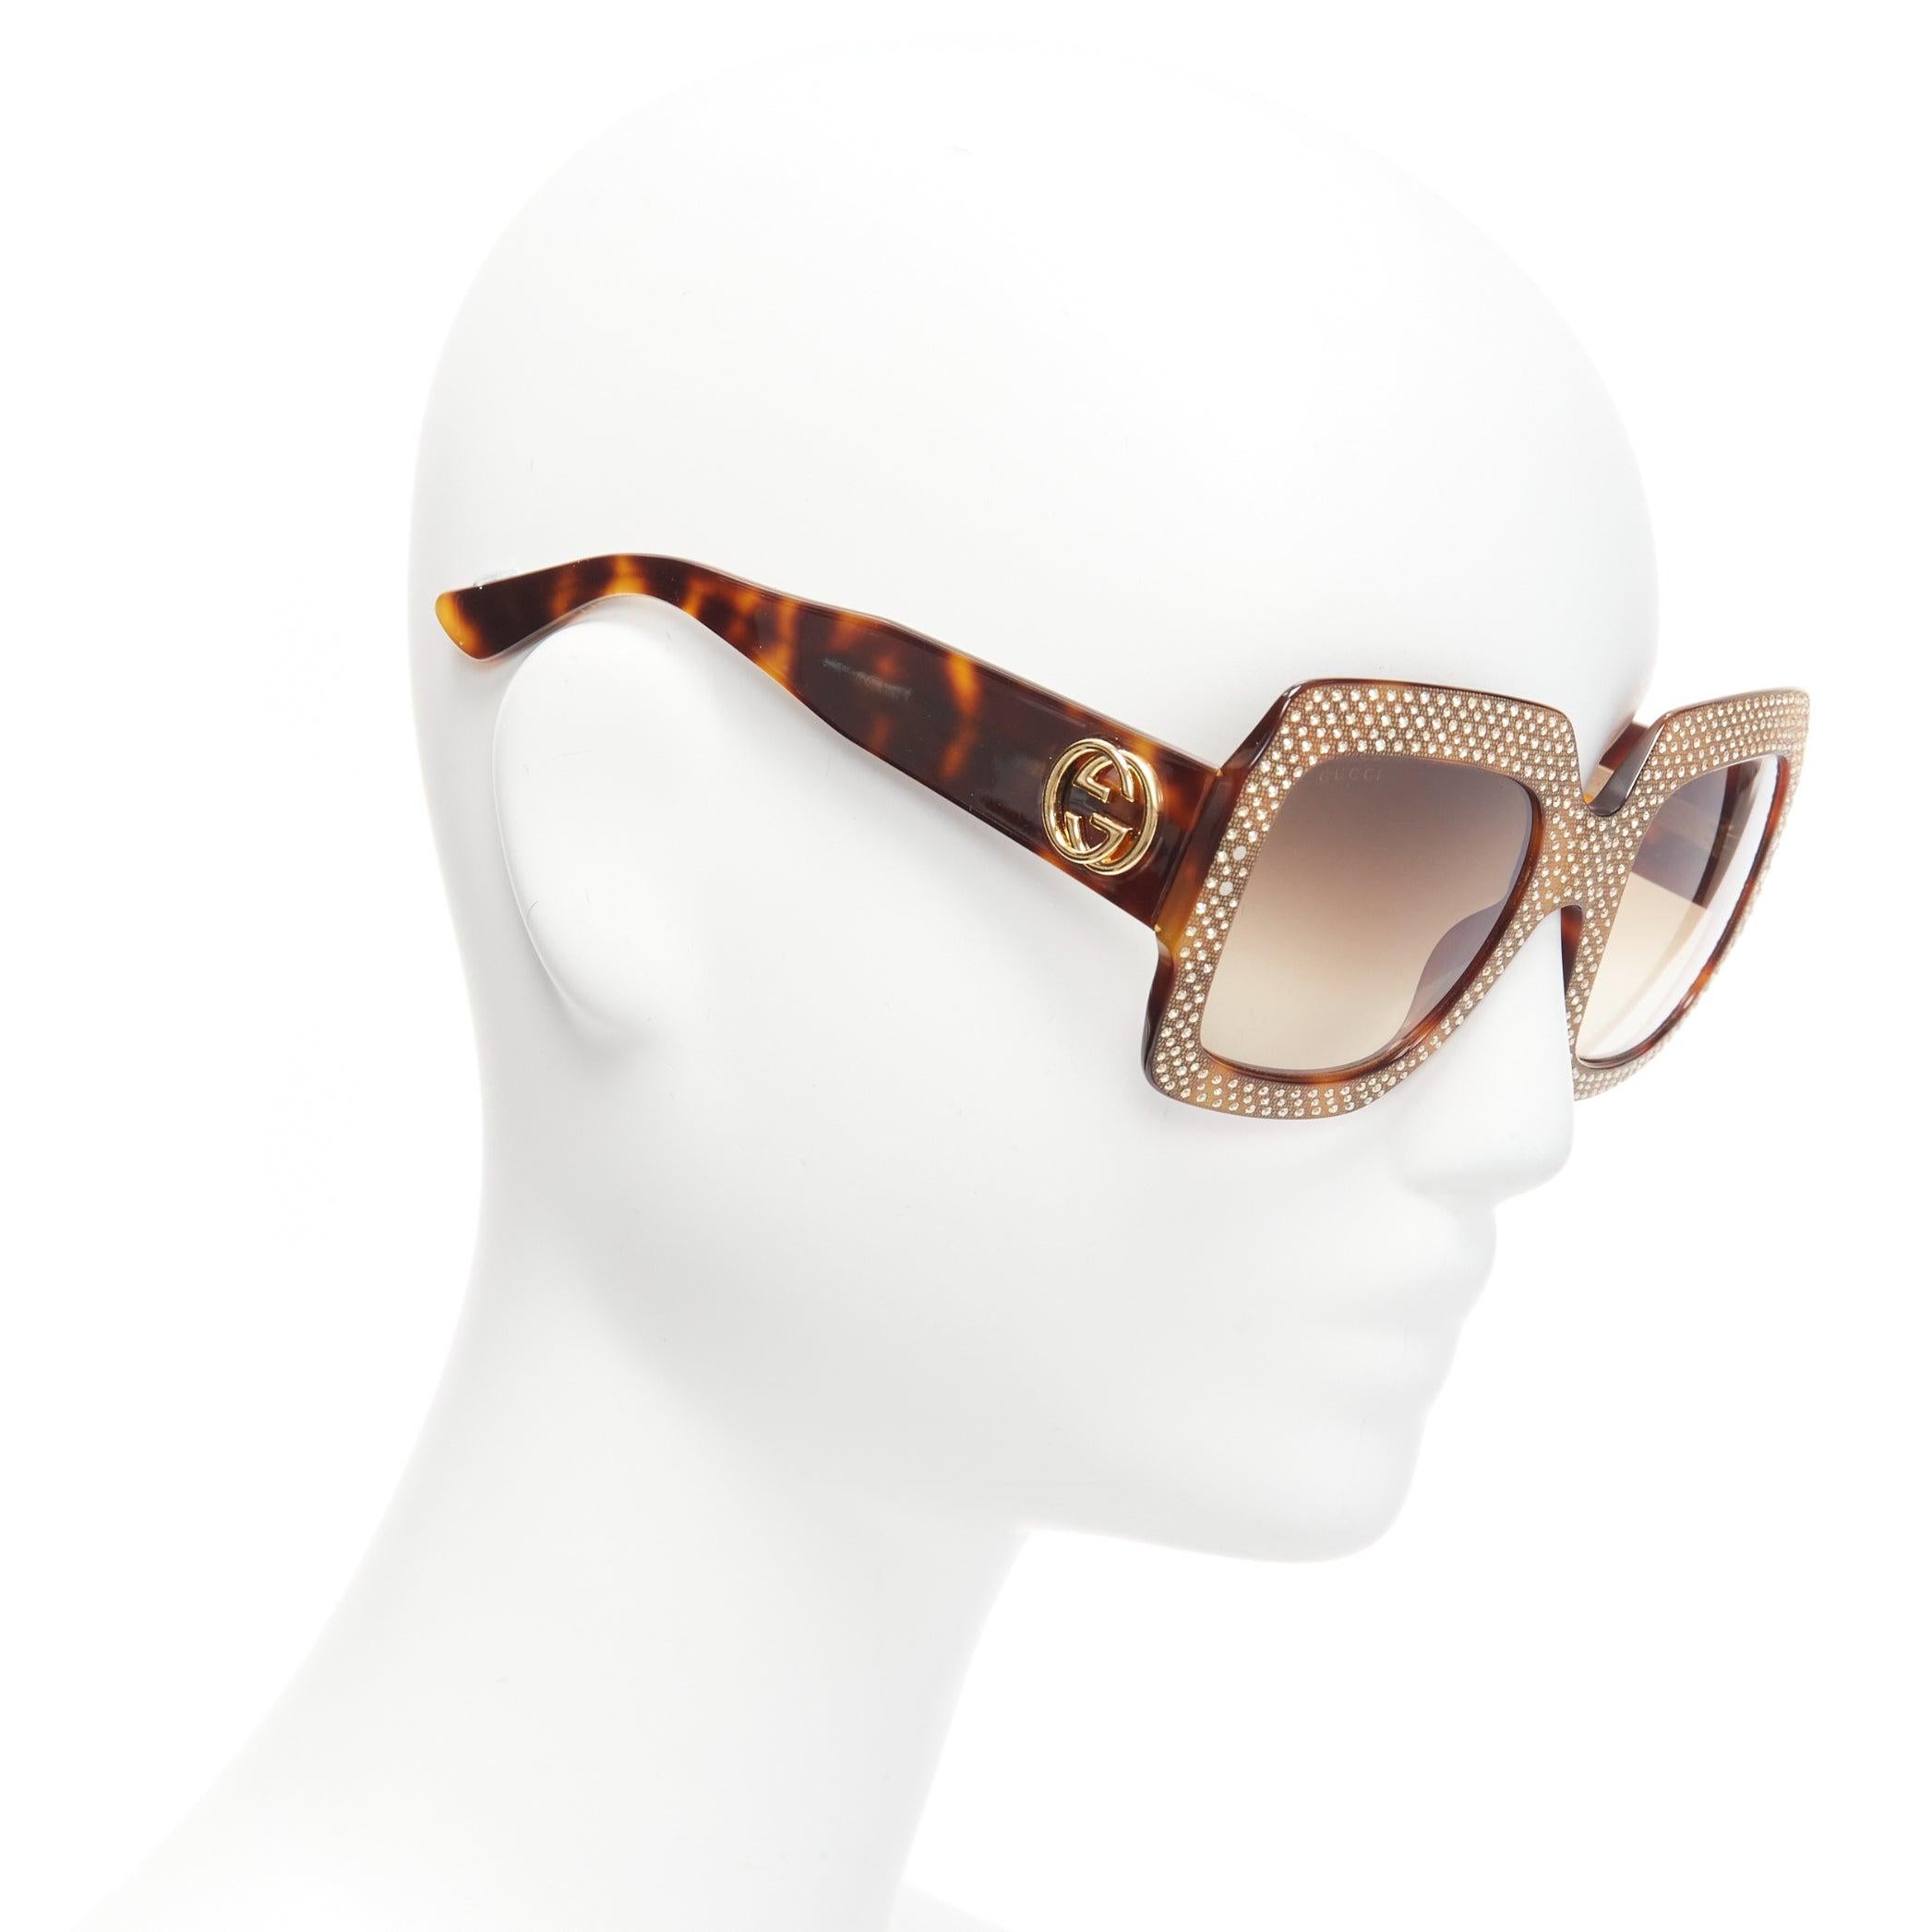 GUCCI GG3861 gold crystal oversized rectangular tortoise sunglasses
Reference: NKLL/A00073
Brand: Gucci
Model: GG3861
Material: Plastic
Color: Gold, Brown
Pattern: Crystals
Made in: Italy

CONDITION:
Condition: Excellent, this item was pre-owned and